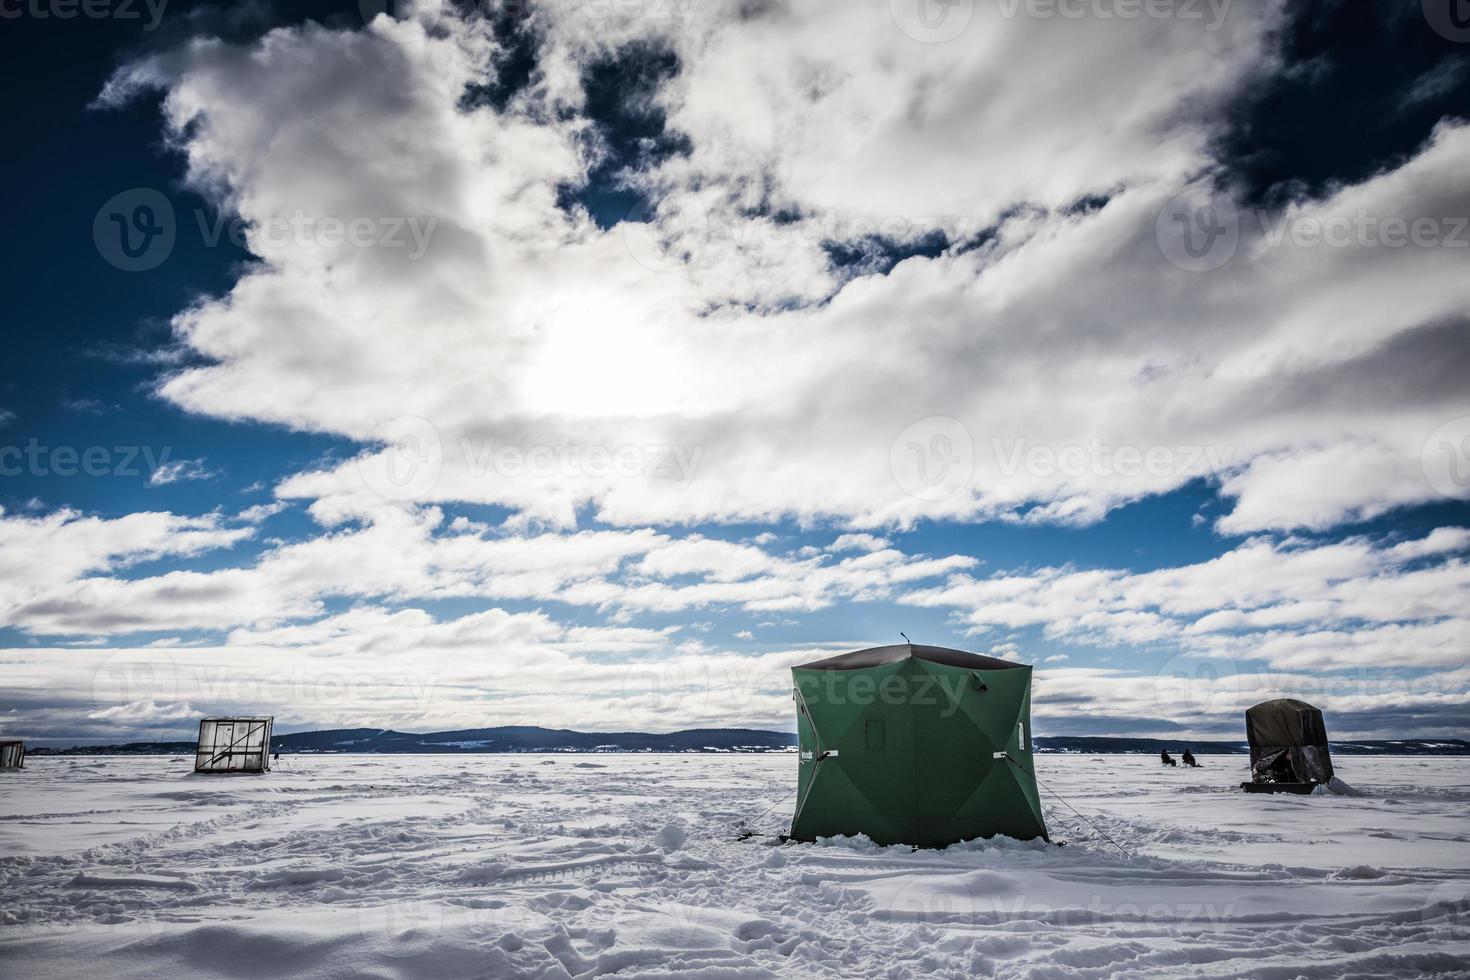 Ice Smelt Fishing Shack during a Cold but Sunny Day of Winter in Quebec photo